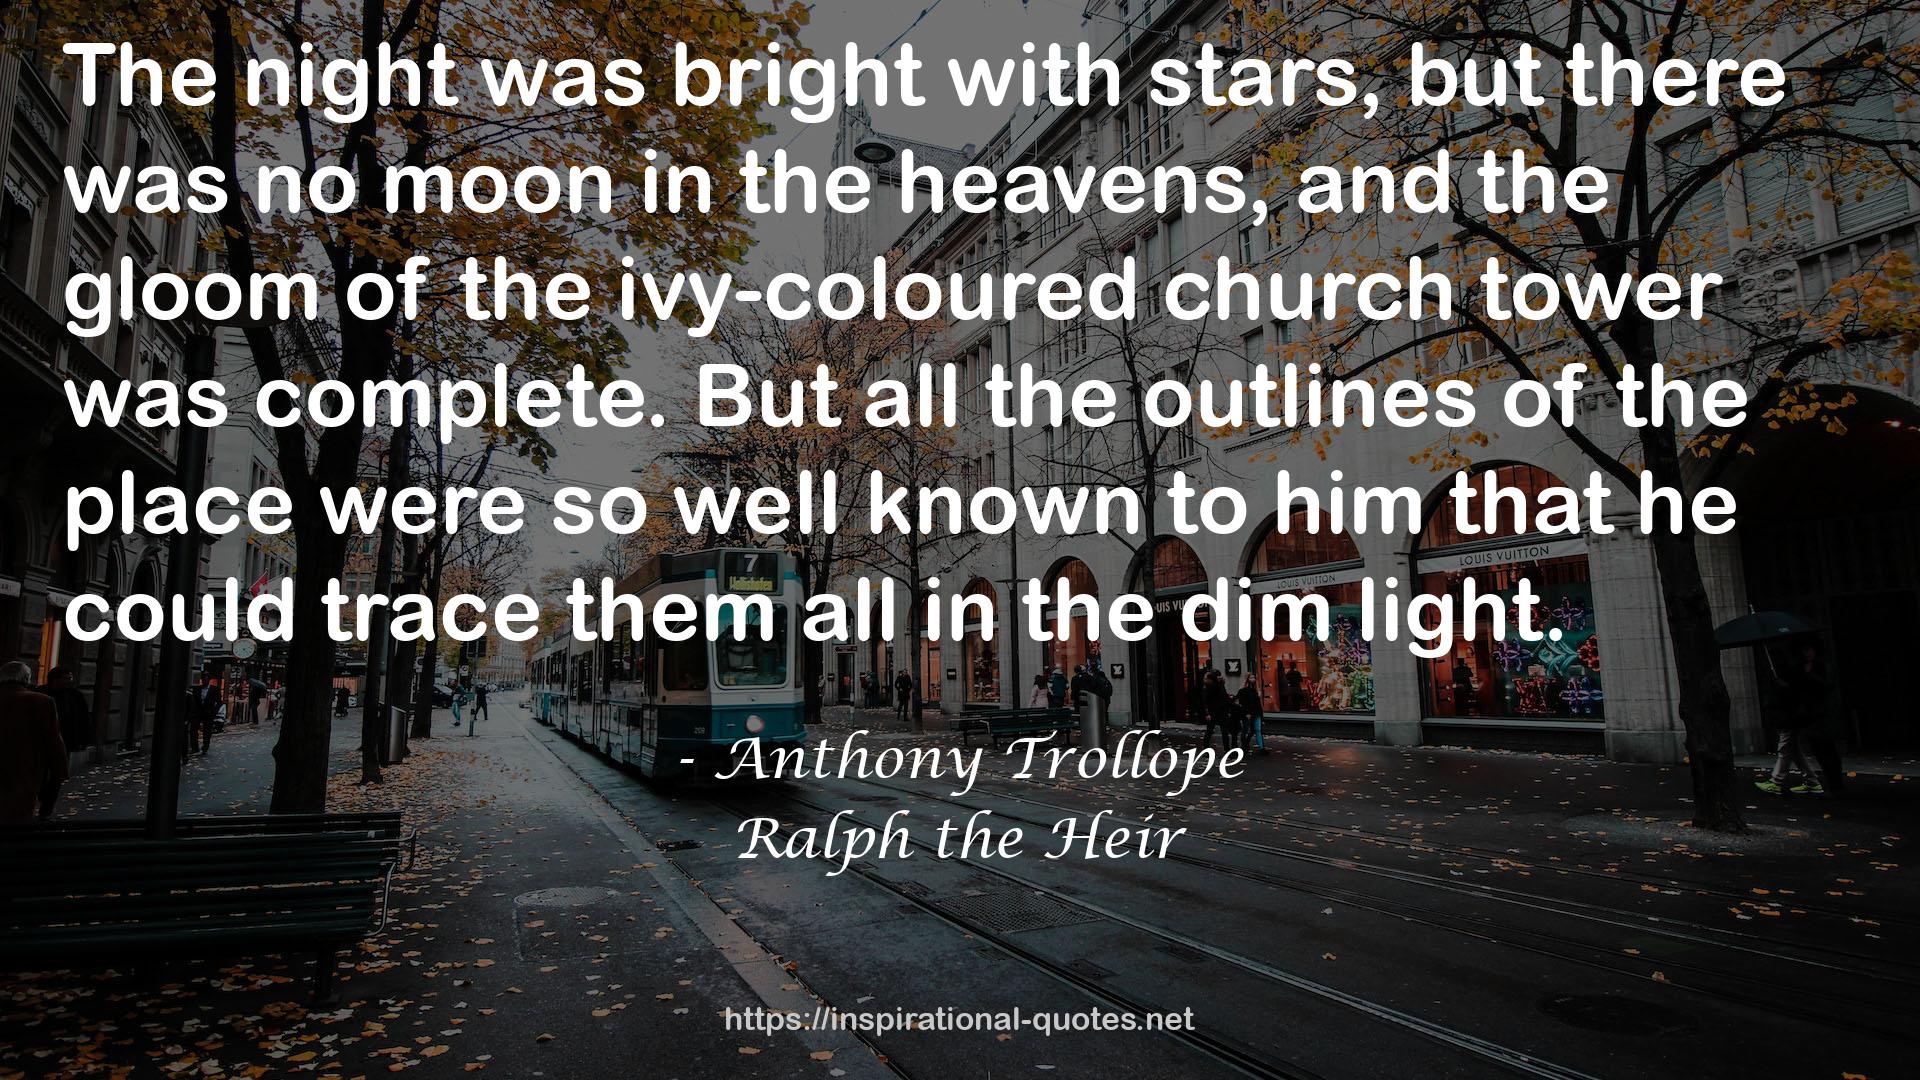 Ralph the Heir QUOTES